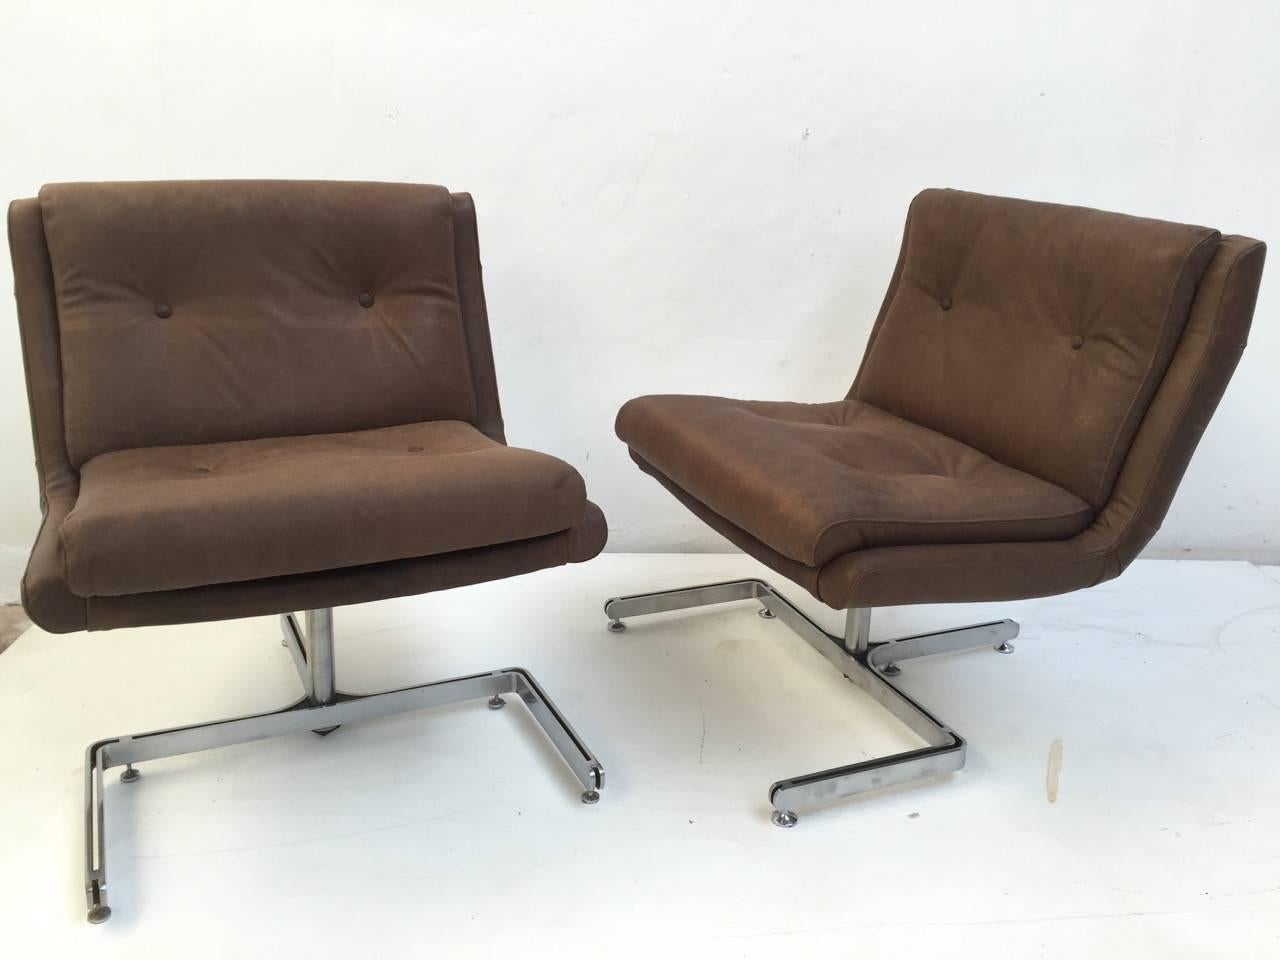 Lovely pair of leather lounge chairs by French designer Raphael. These chairs have been freshly reupholstered in brown leather, with a snake skin impression, specially commissioned by us. The chairs have also had their foam and expensive, authentic